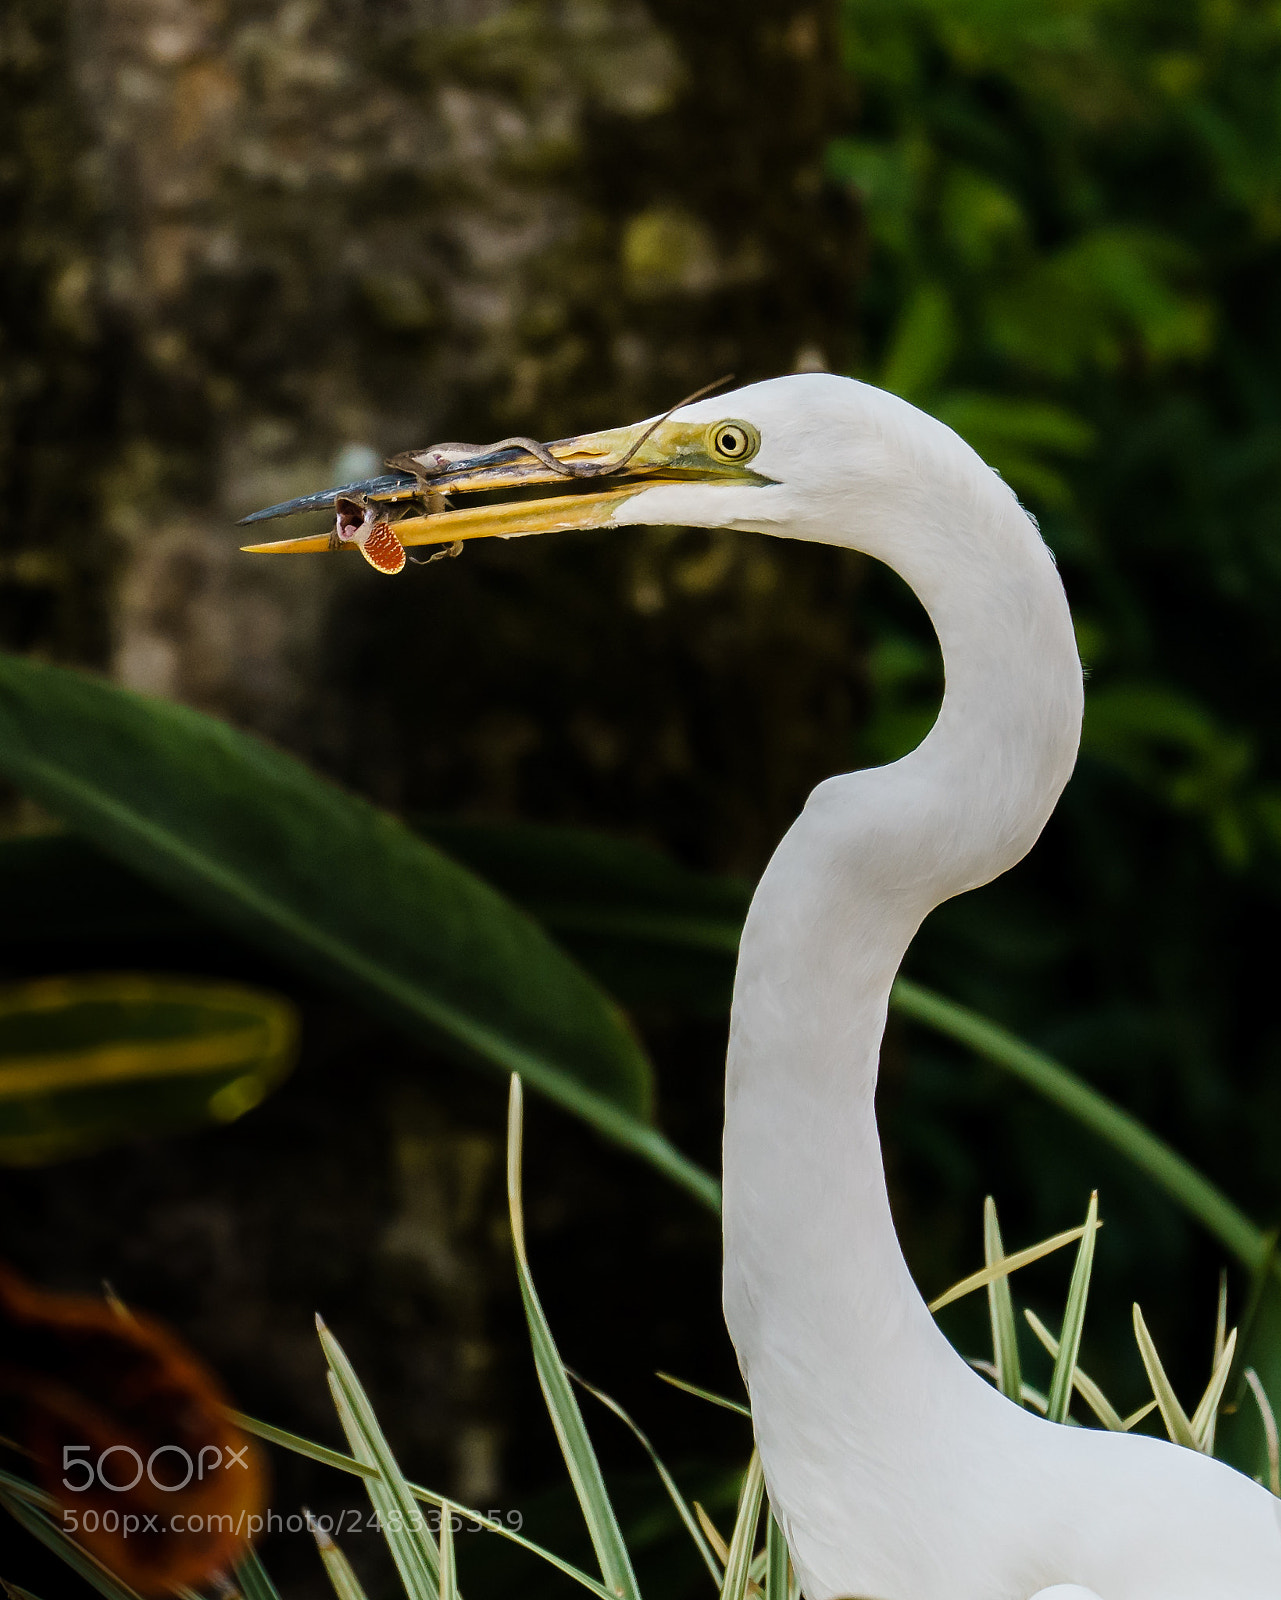 Sony a7R II sample photo. Egret invite lizard at photography